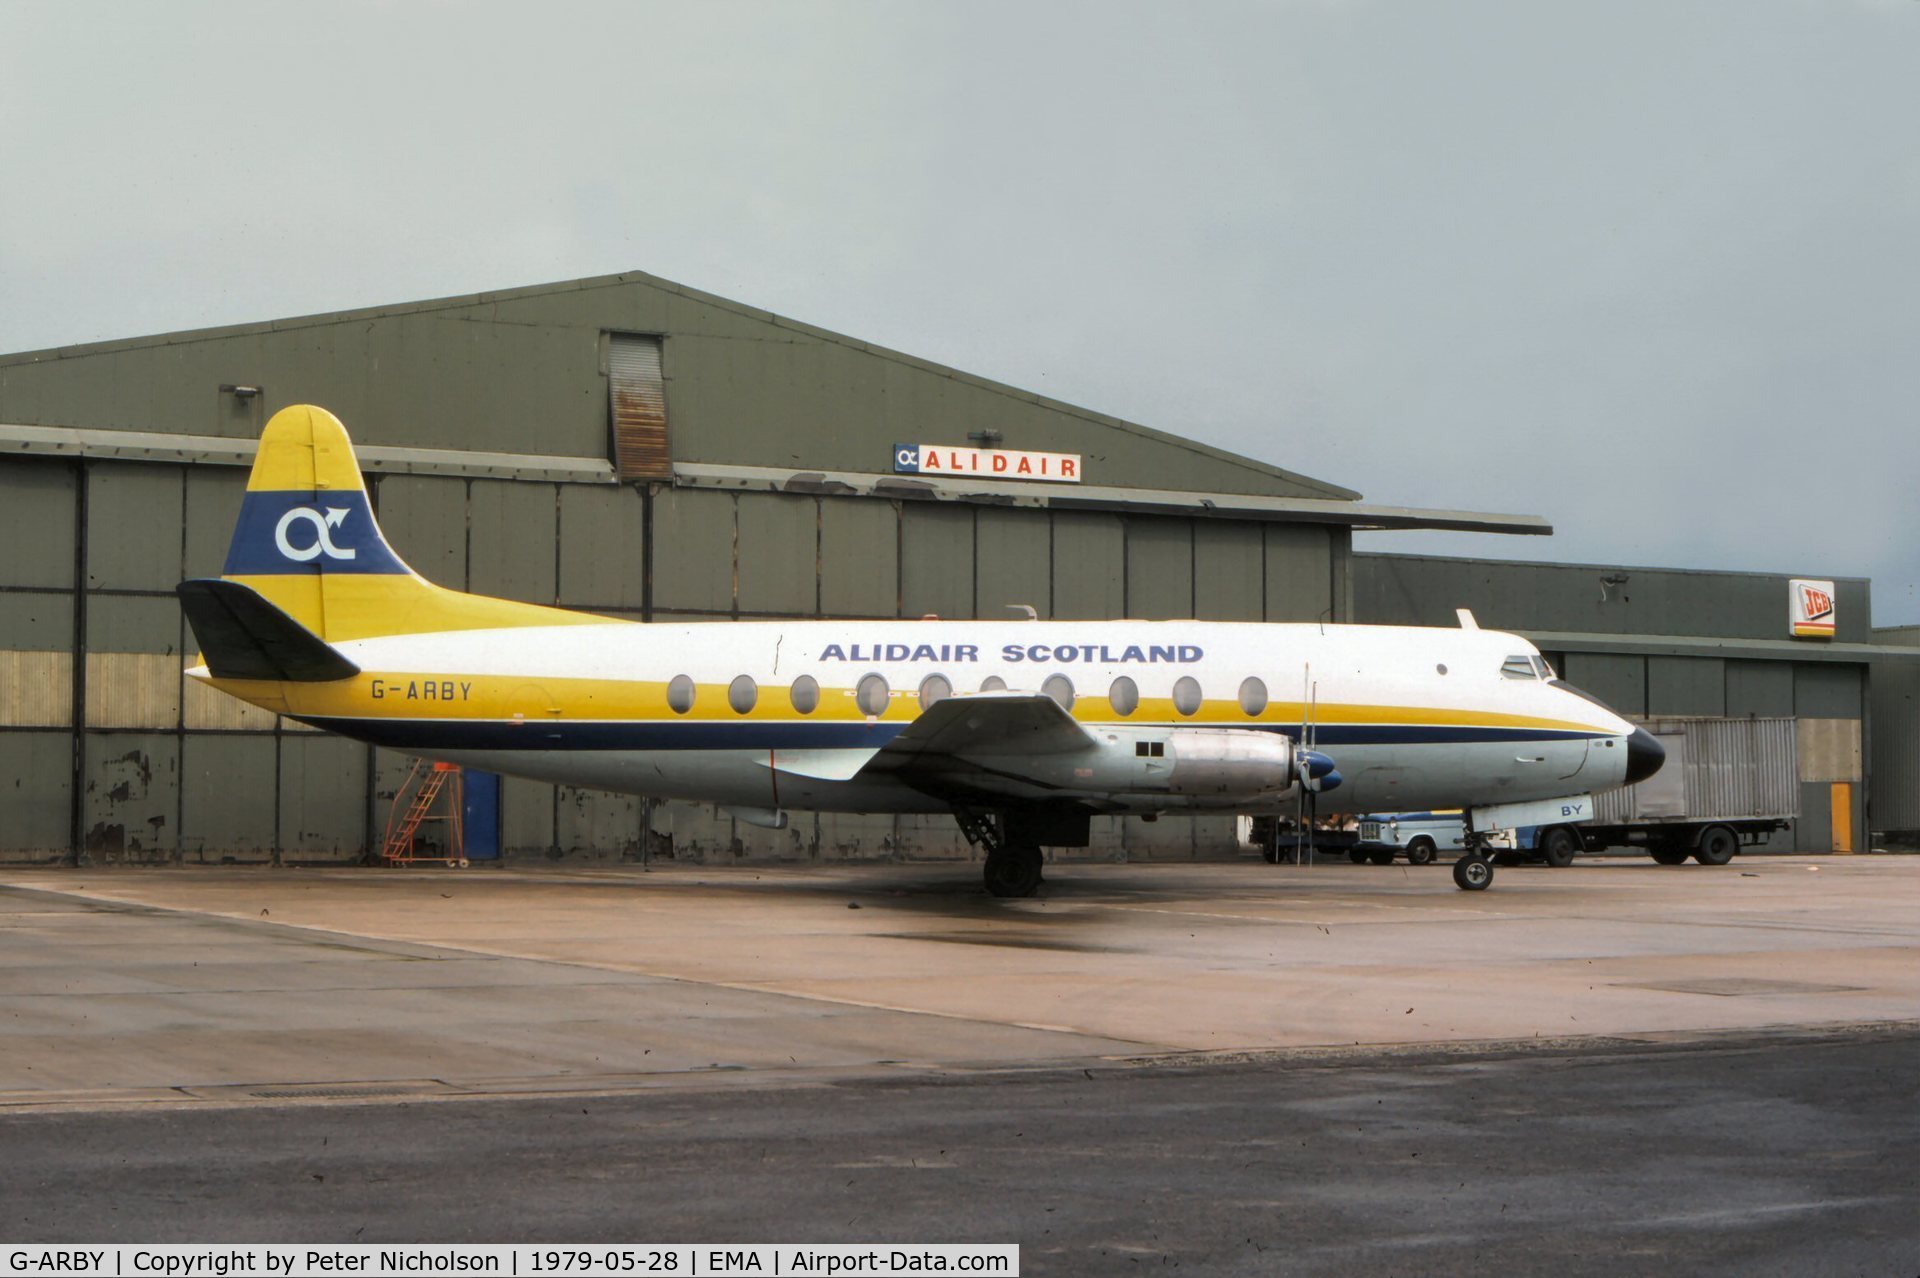 G-ARBY, 1953 Vickers Viscount 708 C/N 10, Viscount 708 of Alidair Scotland seen at East Midlands Airport in May 1979 - sadly this aircraft was written off a year later.